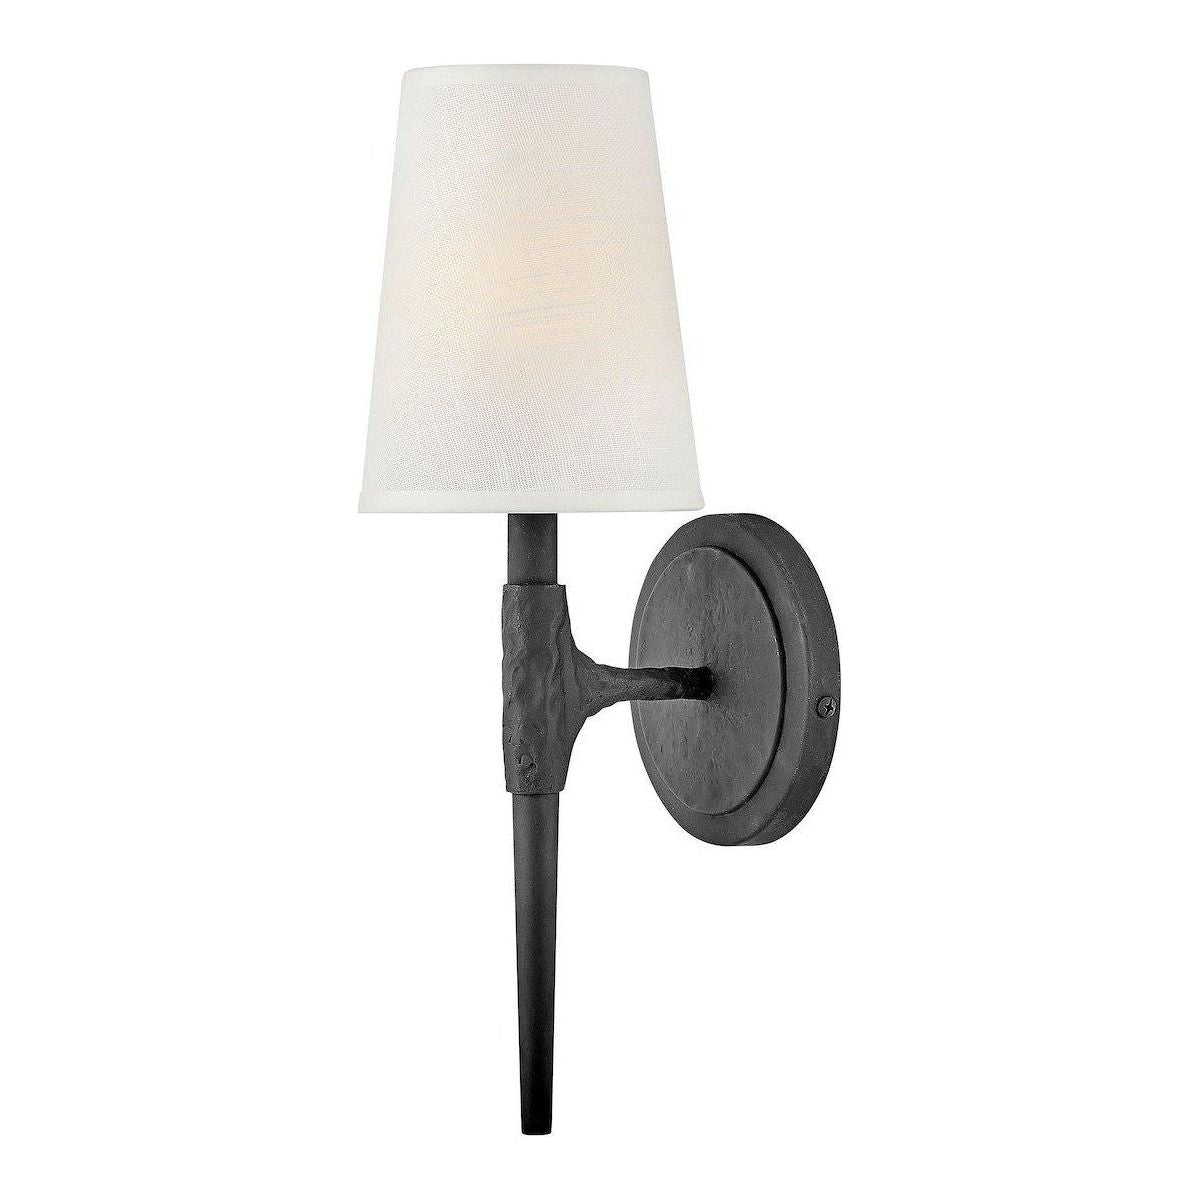 Hinkley - Beaumont Sconce - Lights Canada